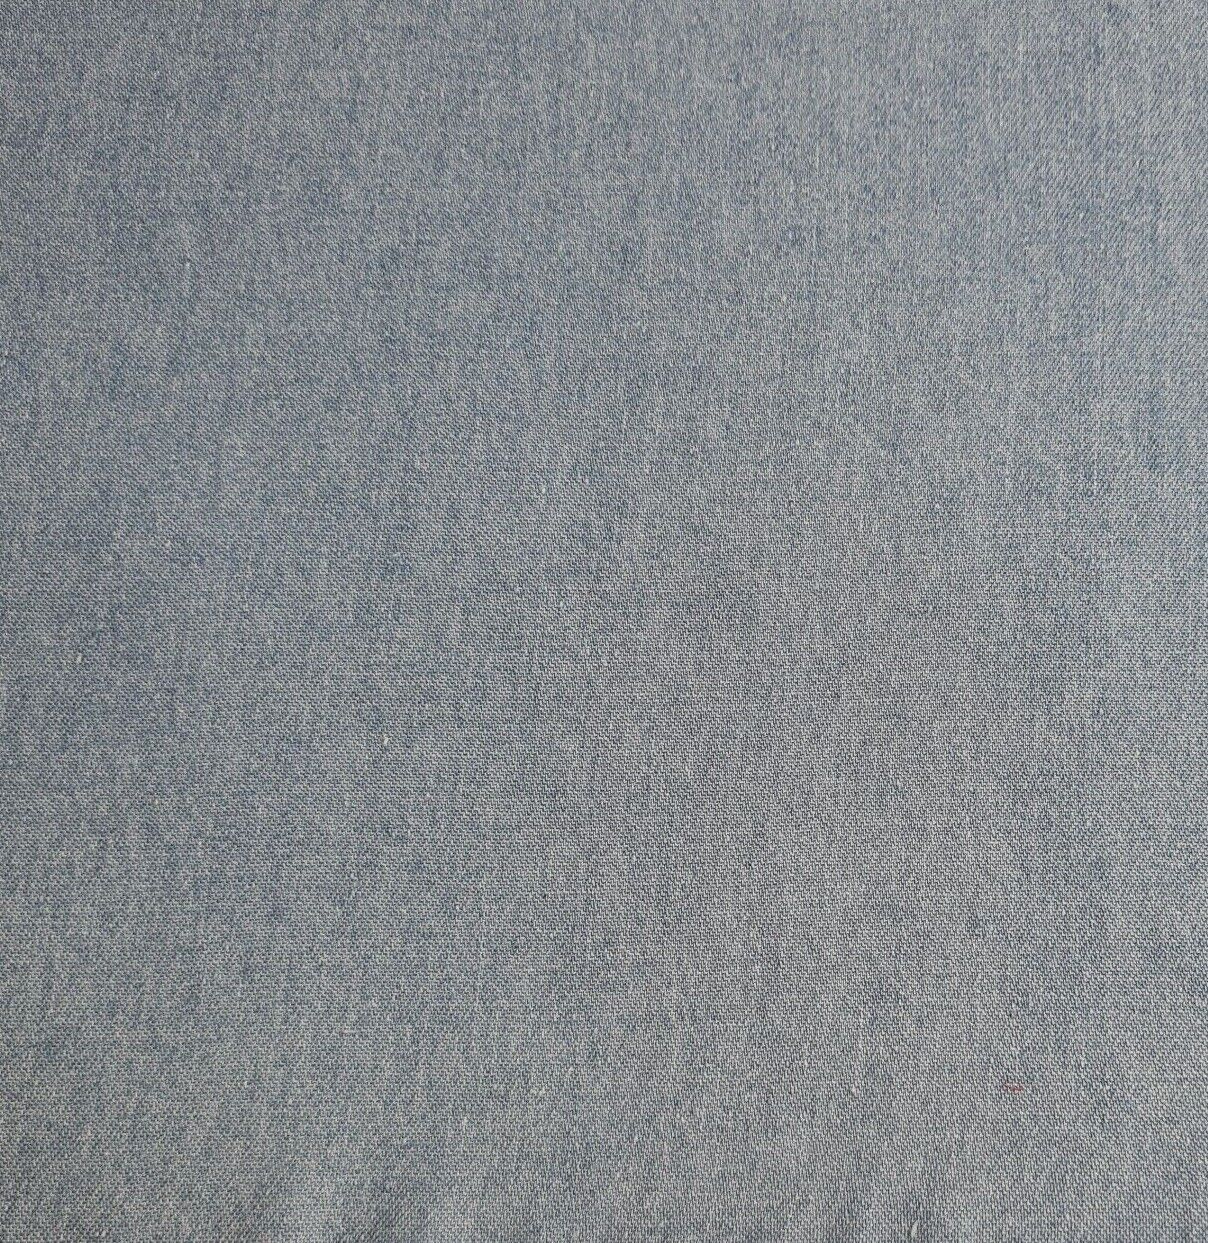 Cotton Denim Fabric Thin And Soft Light Blue Colour 55" Wide Sold By The Metre